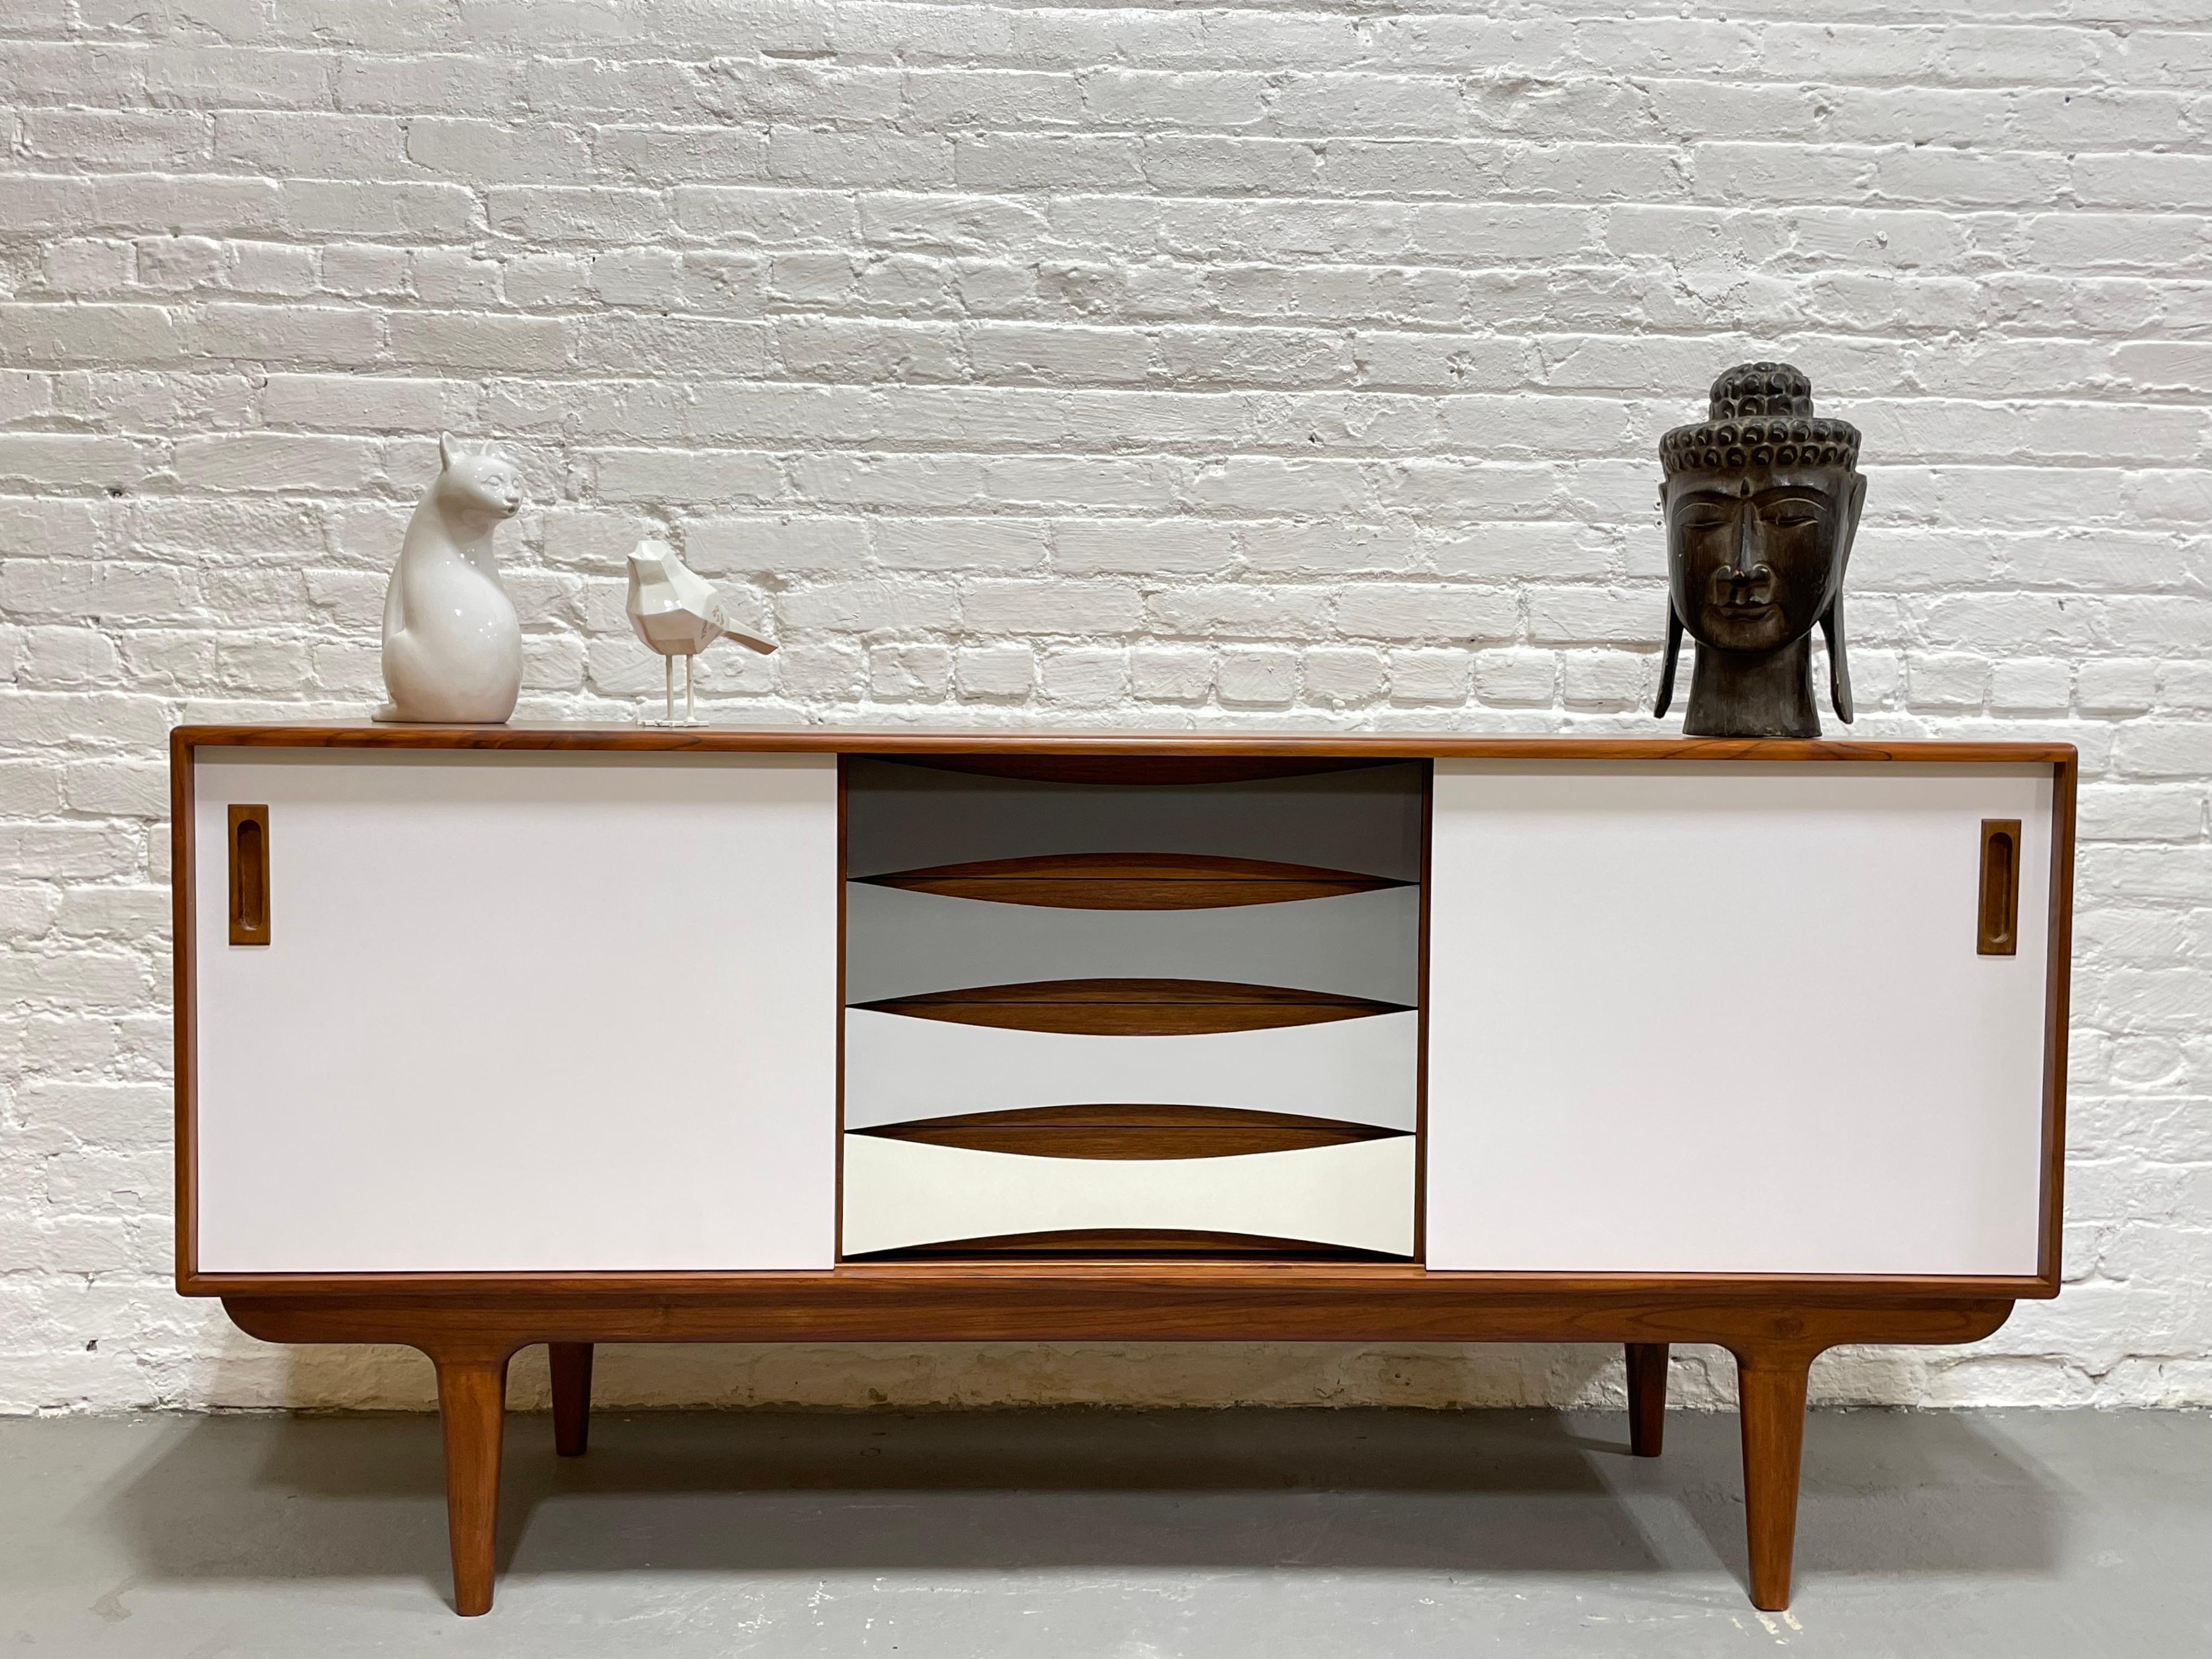 Our Mid-Century Modern styled HANDMADE “Shades of Gray” credenza offers a stunning combination of center drawer space and adjustable shelving along each side. This gorgeous piece is finished with thin sheets of colored laminate over solid wood –